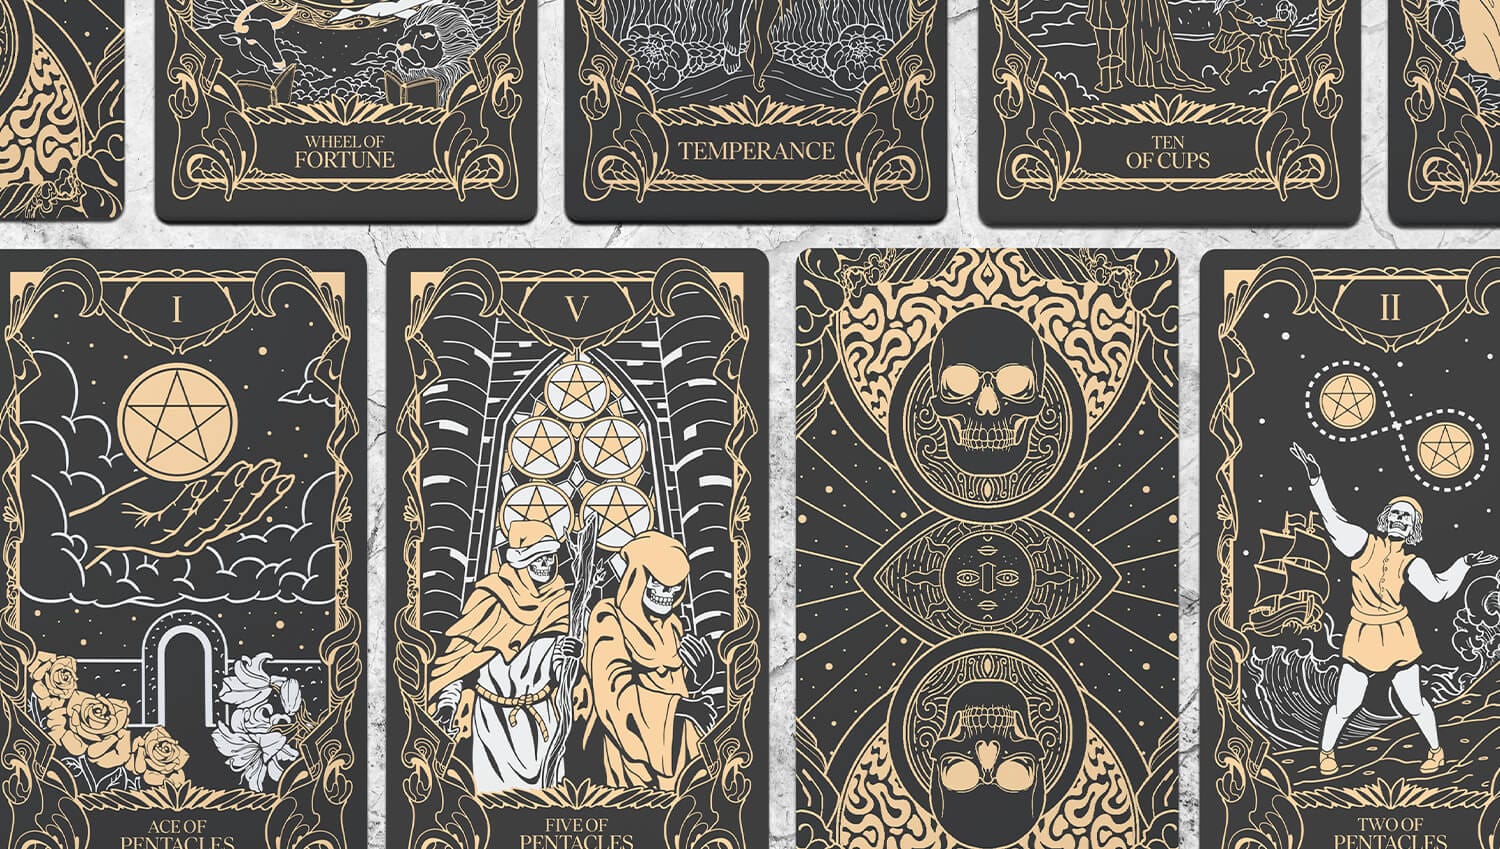 The tarot cards are shown in black and gold.